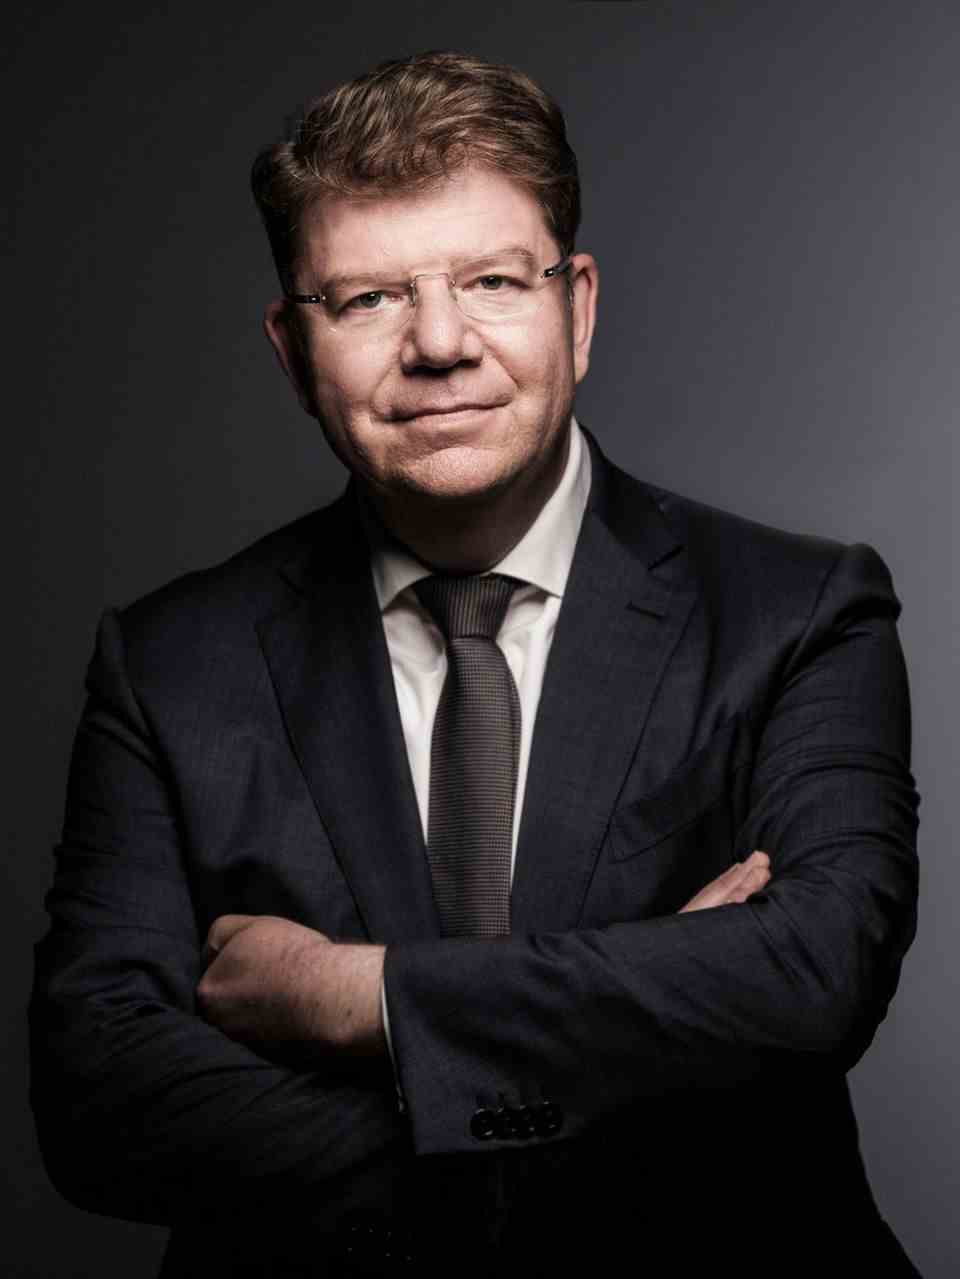 Christoph Knauer with a white shirt, gray tie and black sack